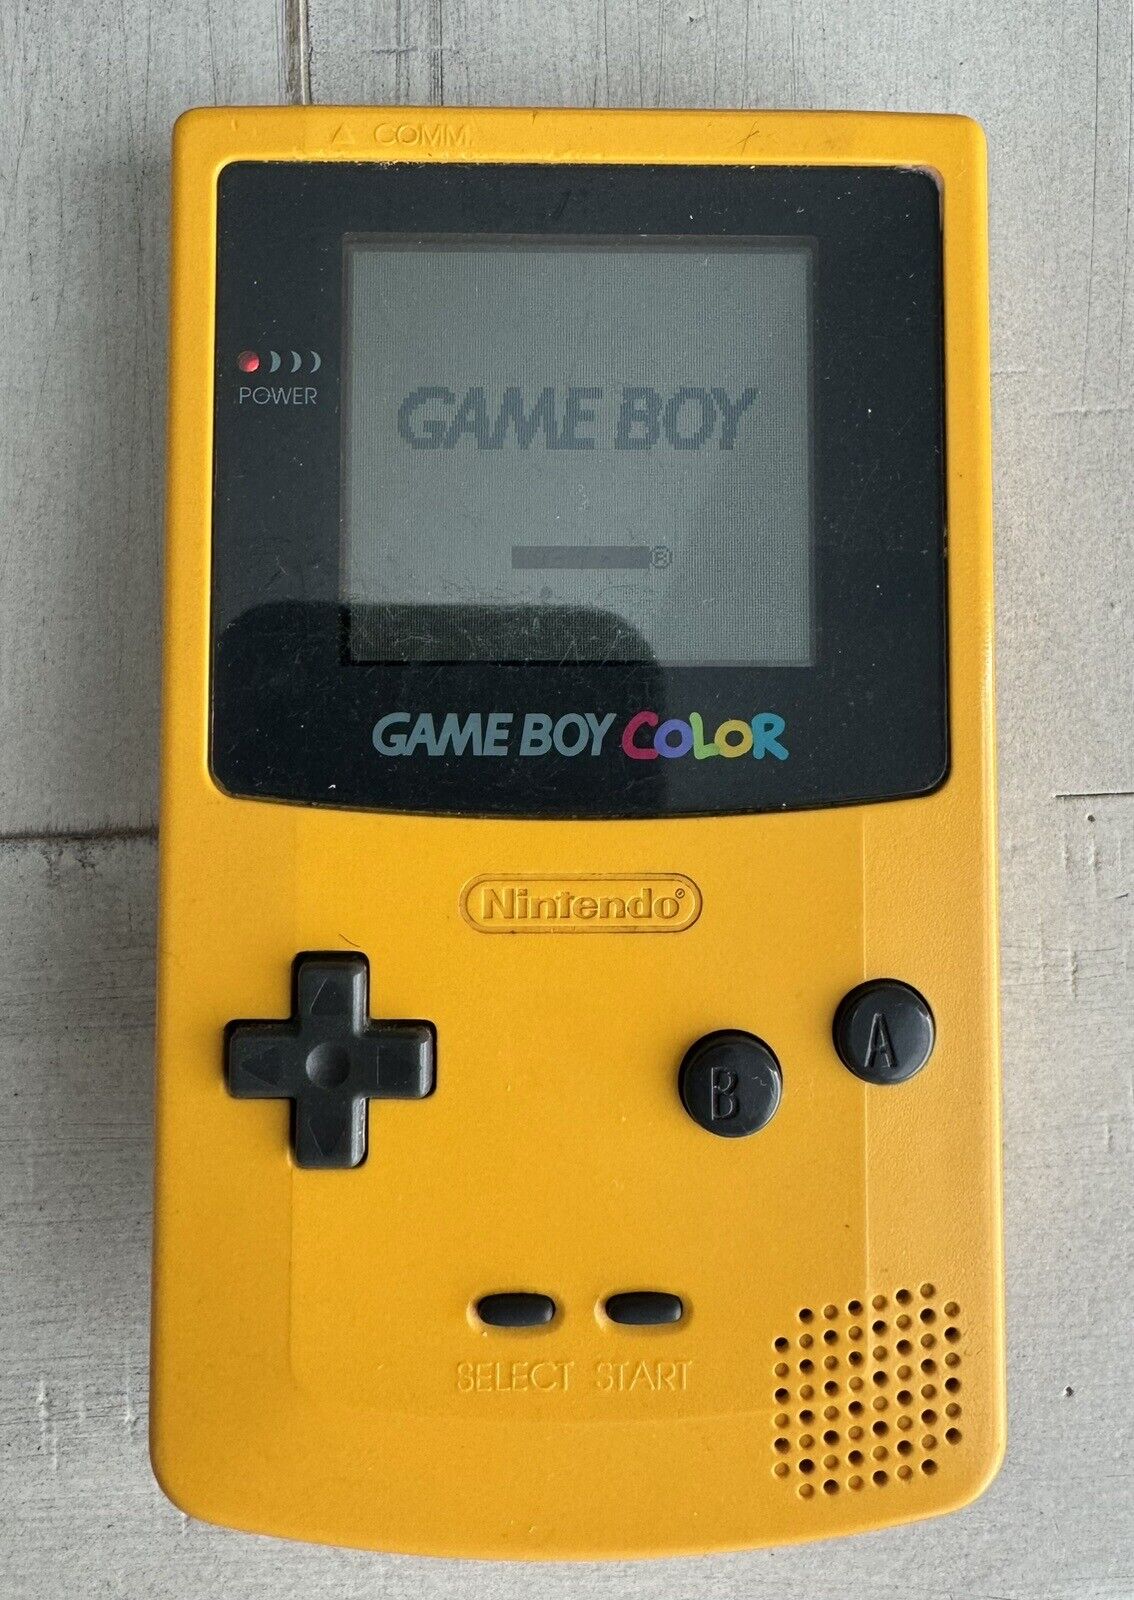 VERY NICE YELLOW NINTENDO GAME BOY COLOR CONSULE (TESTED AND WORKS GREAT)